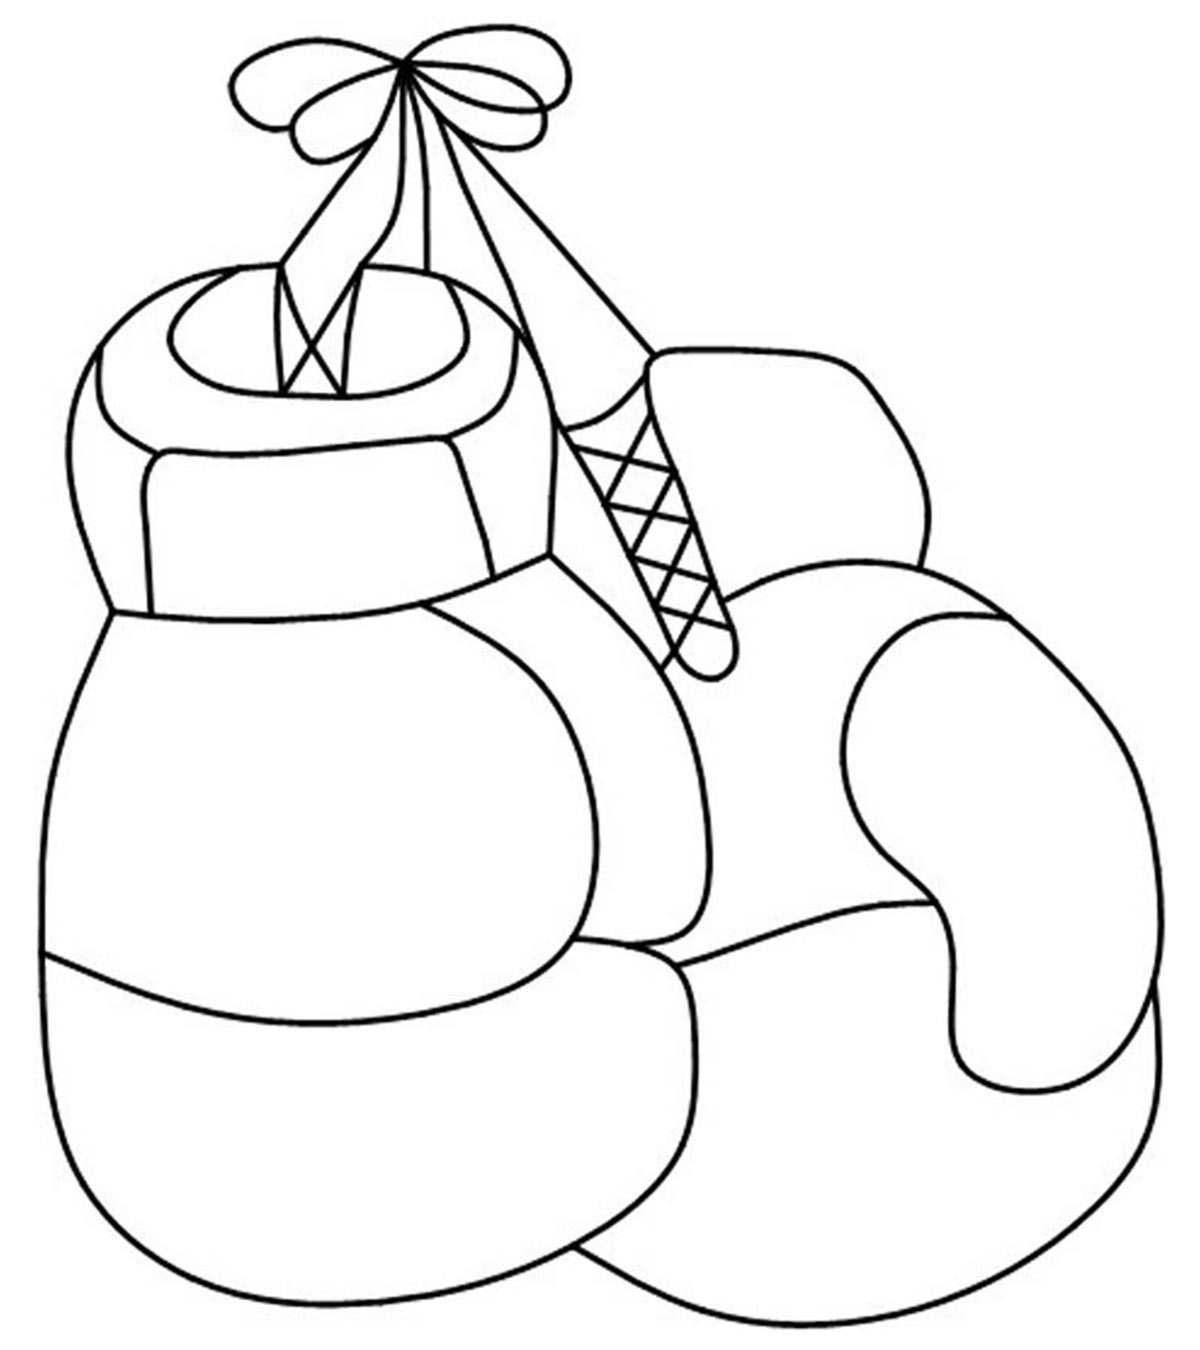 Top 10 Boxing Coloring Pages For Your Naughty Kid_image